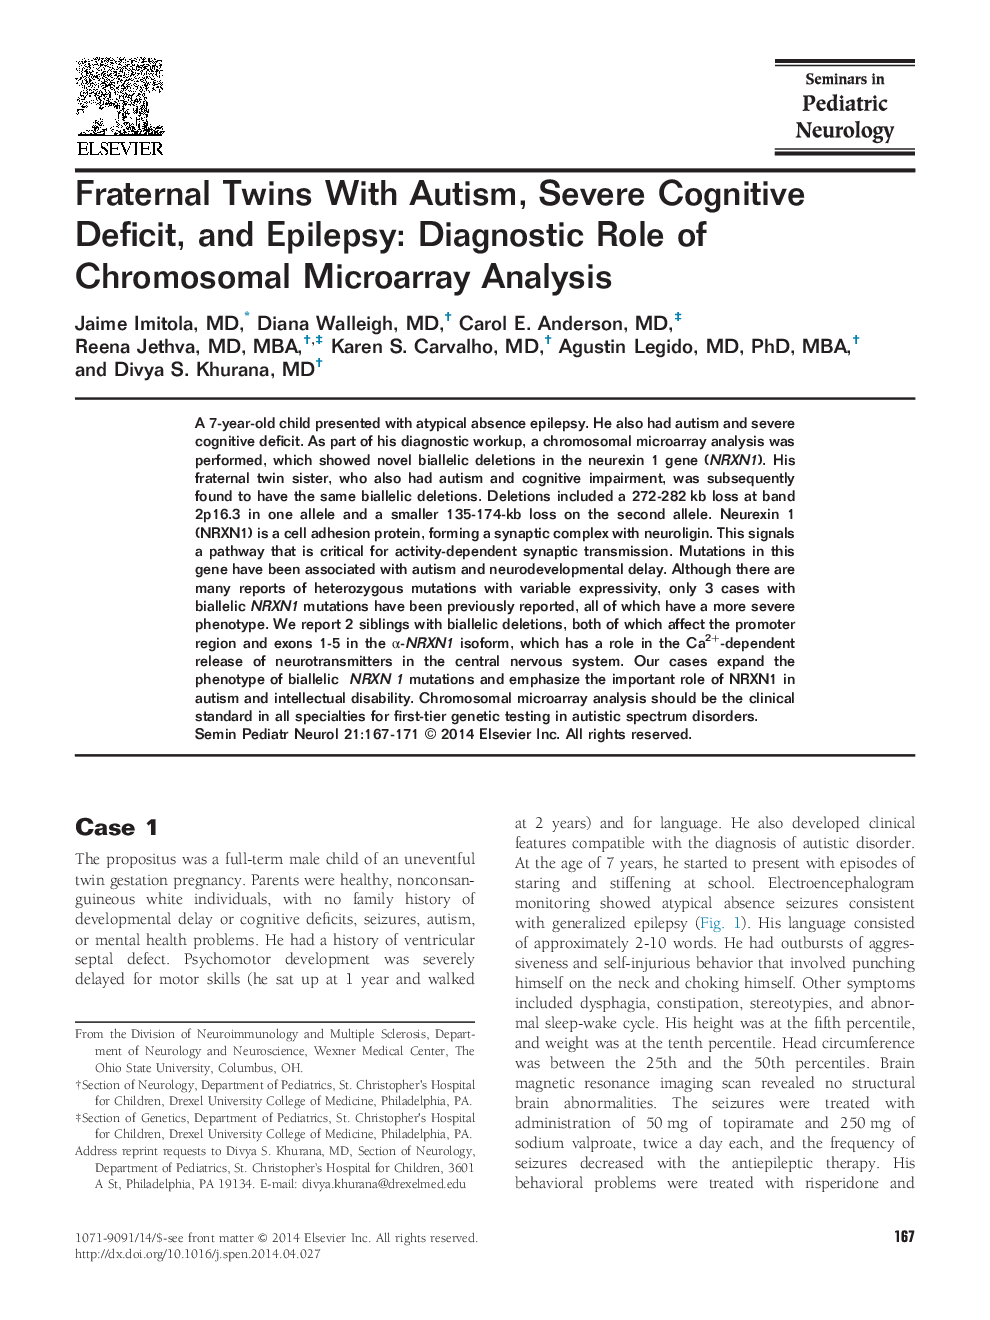 Fraternal Twins With Autism, Severe Cognitive Deficit, and Epilepsy: Diagnostic Role of Chromosomal Microarray Analysis